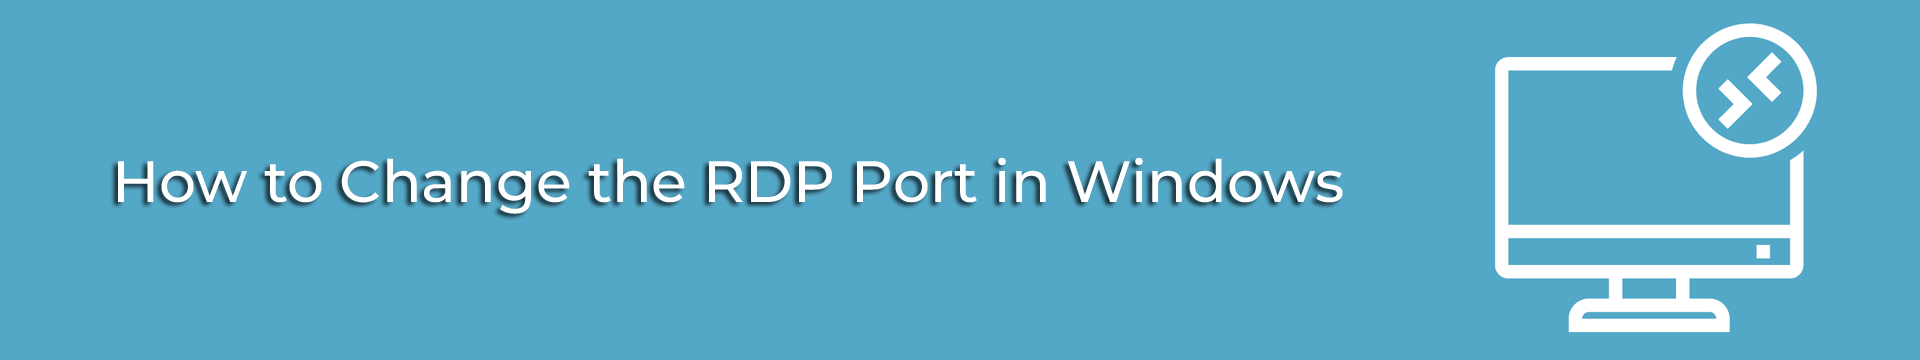 How to Change the RDP Port in Windows